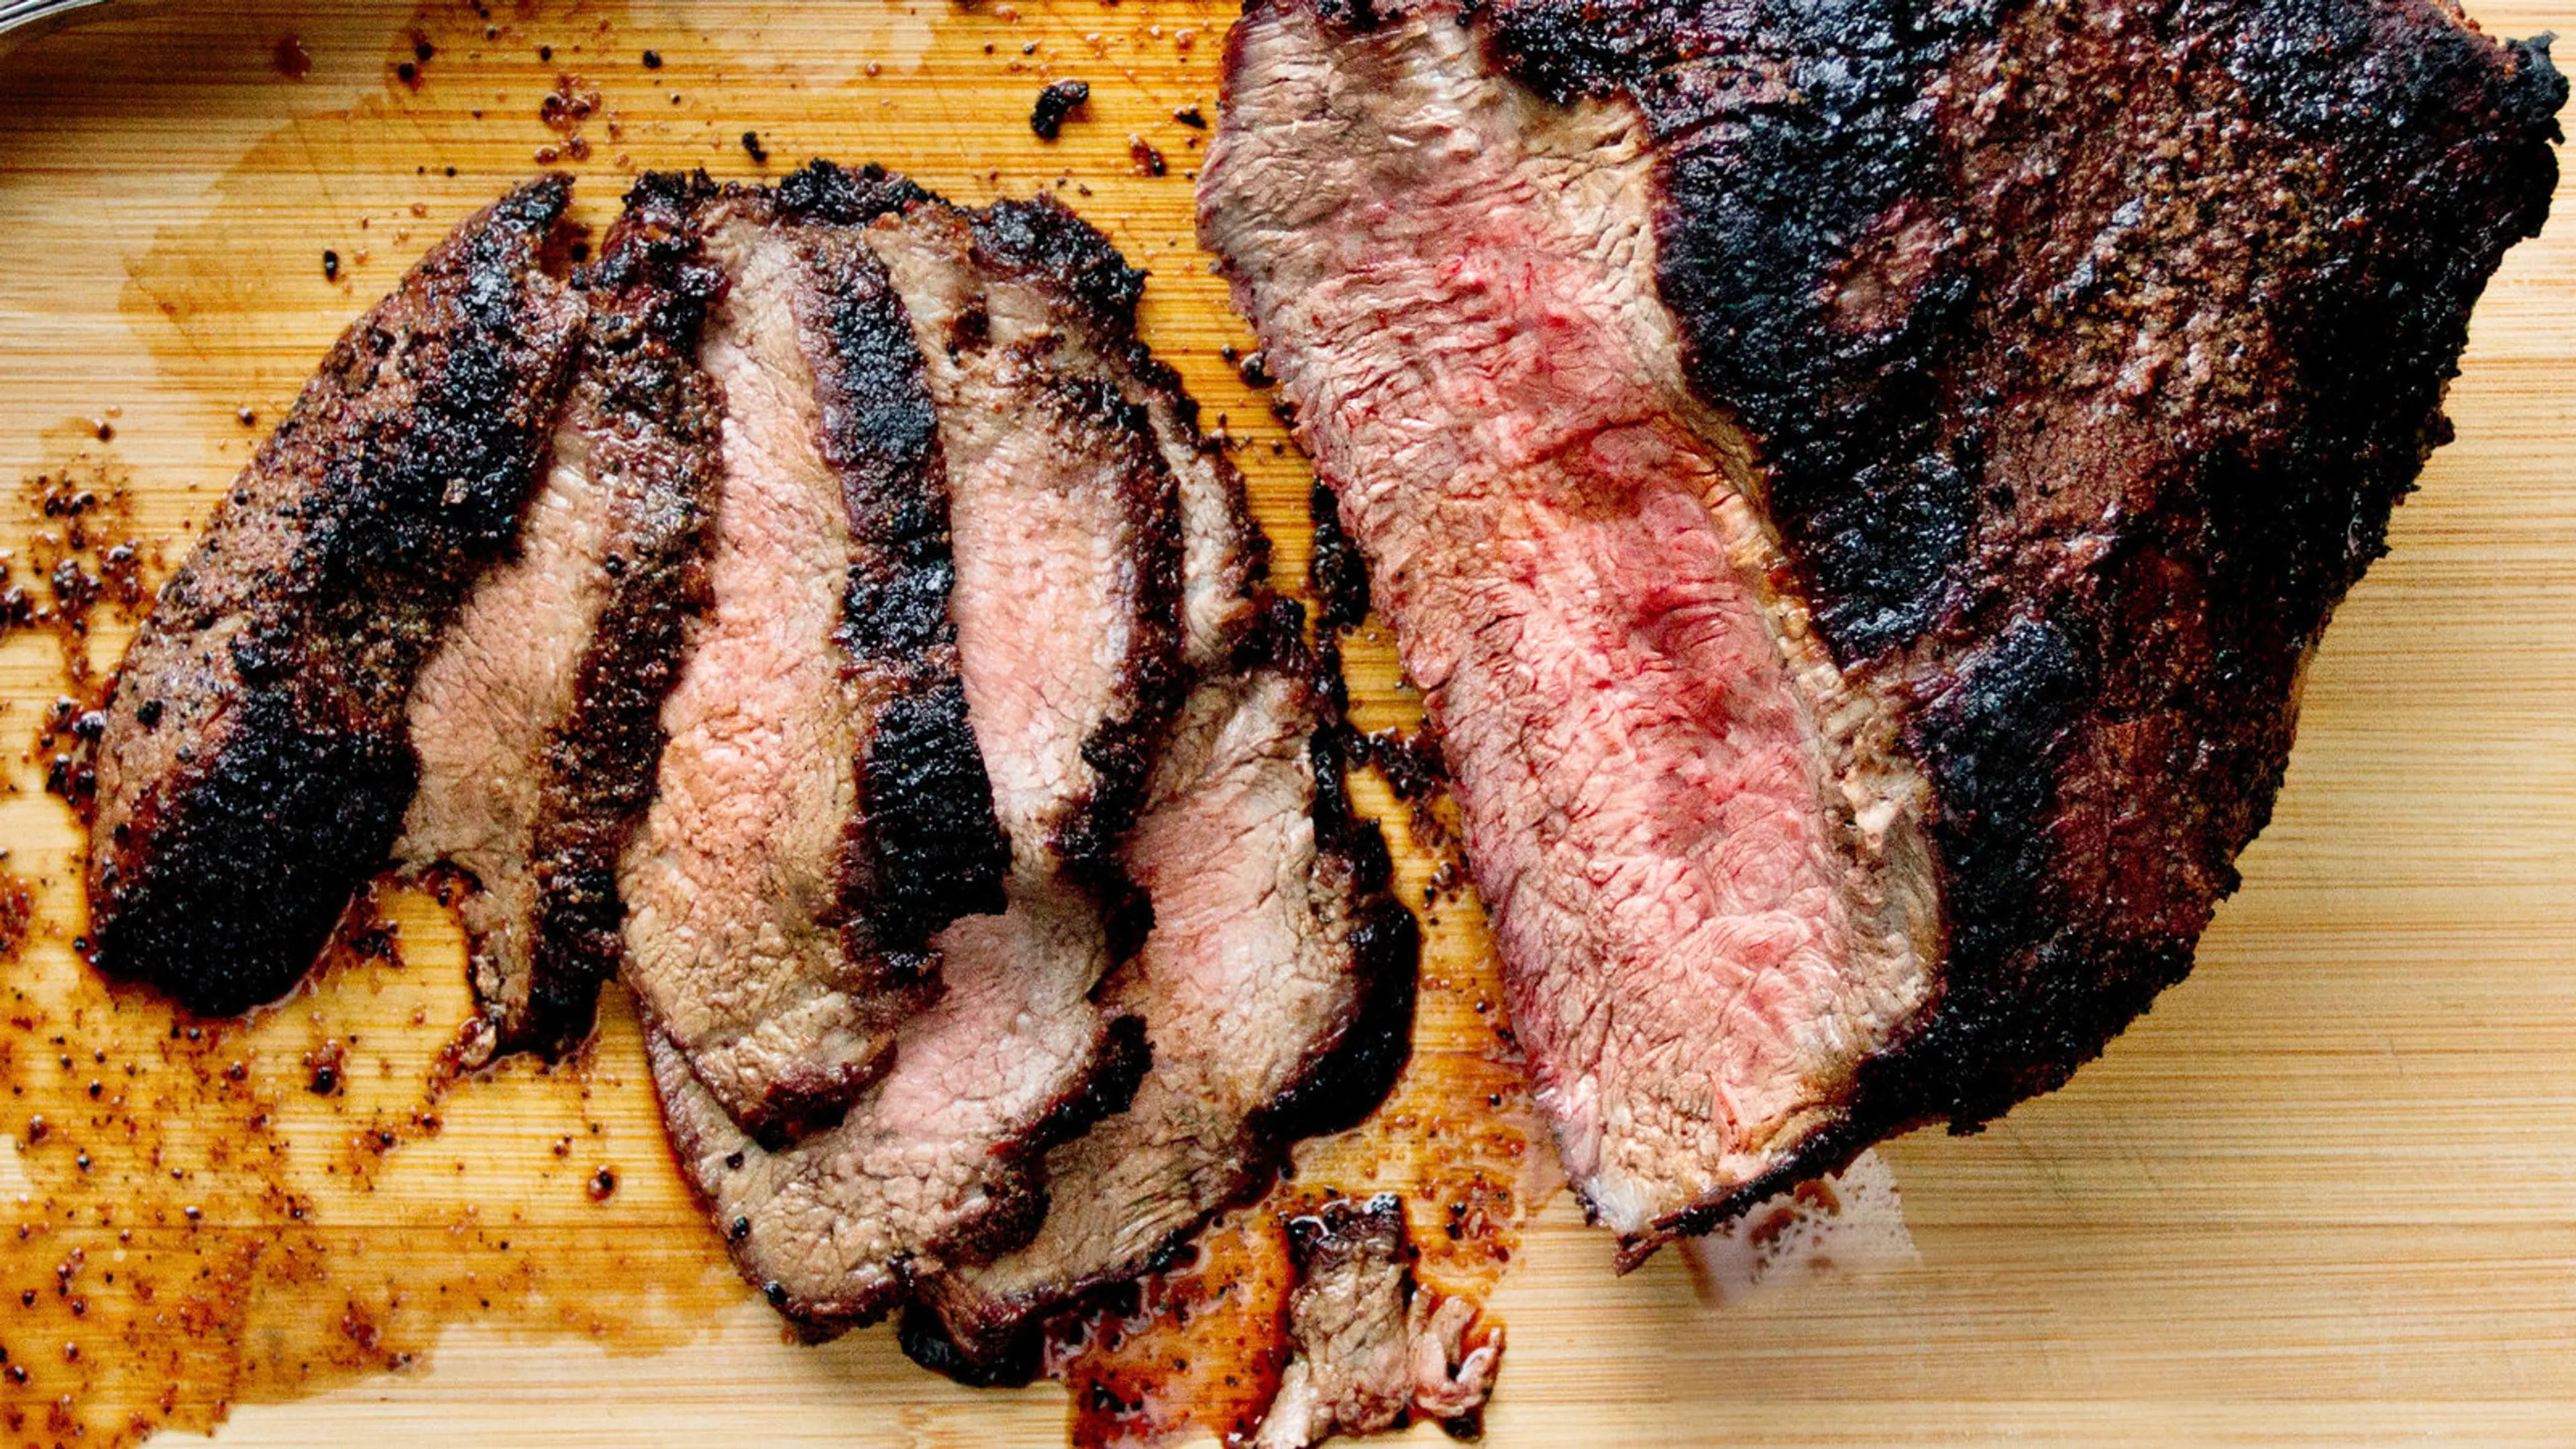 Grilled or Oven-Roasted Santa Maria Tri-Tip